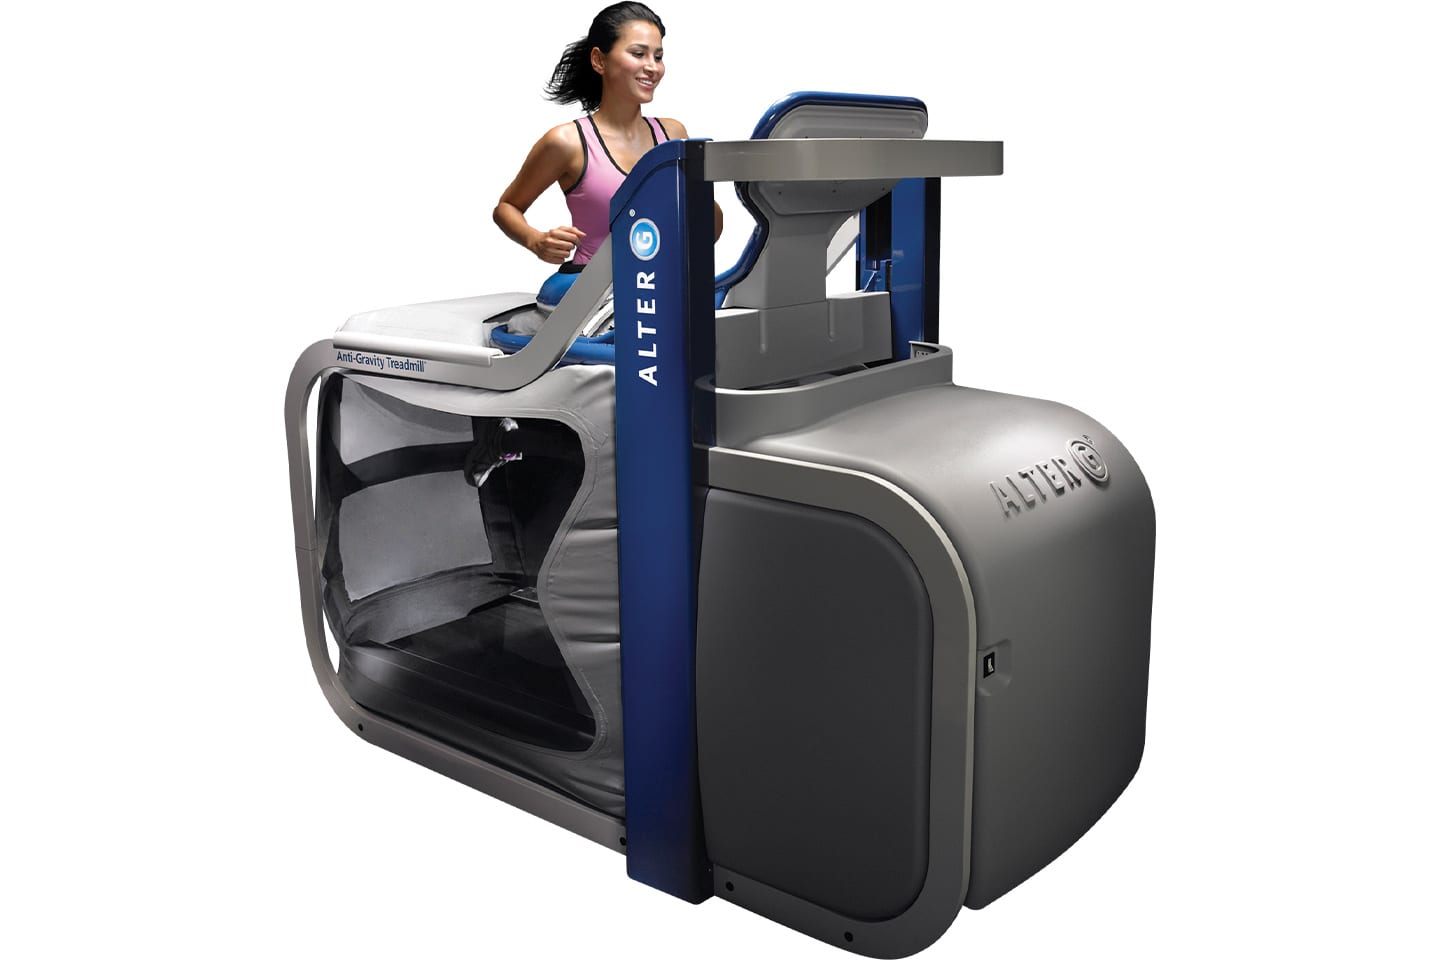 AlterG Anti-Gravity Treadmill chattanooga tech for your health